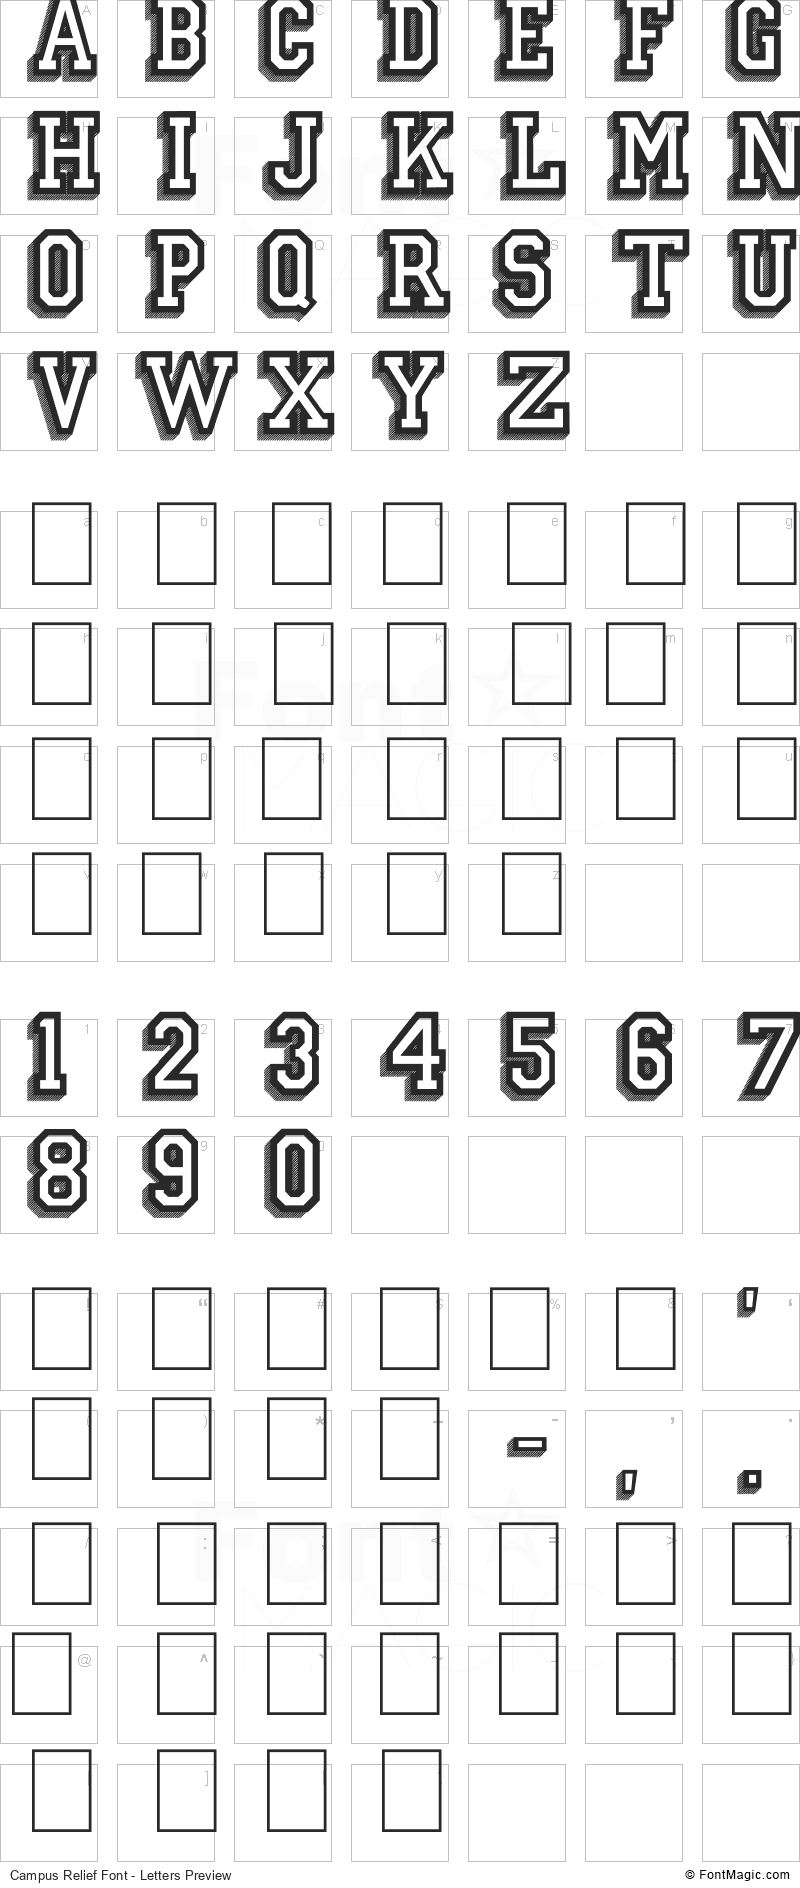 Campus Relief Font - All Latters Preview Chart